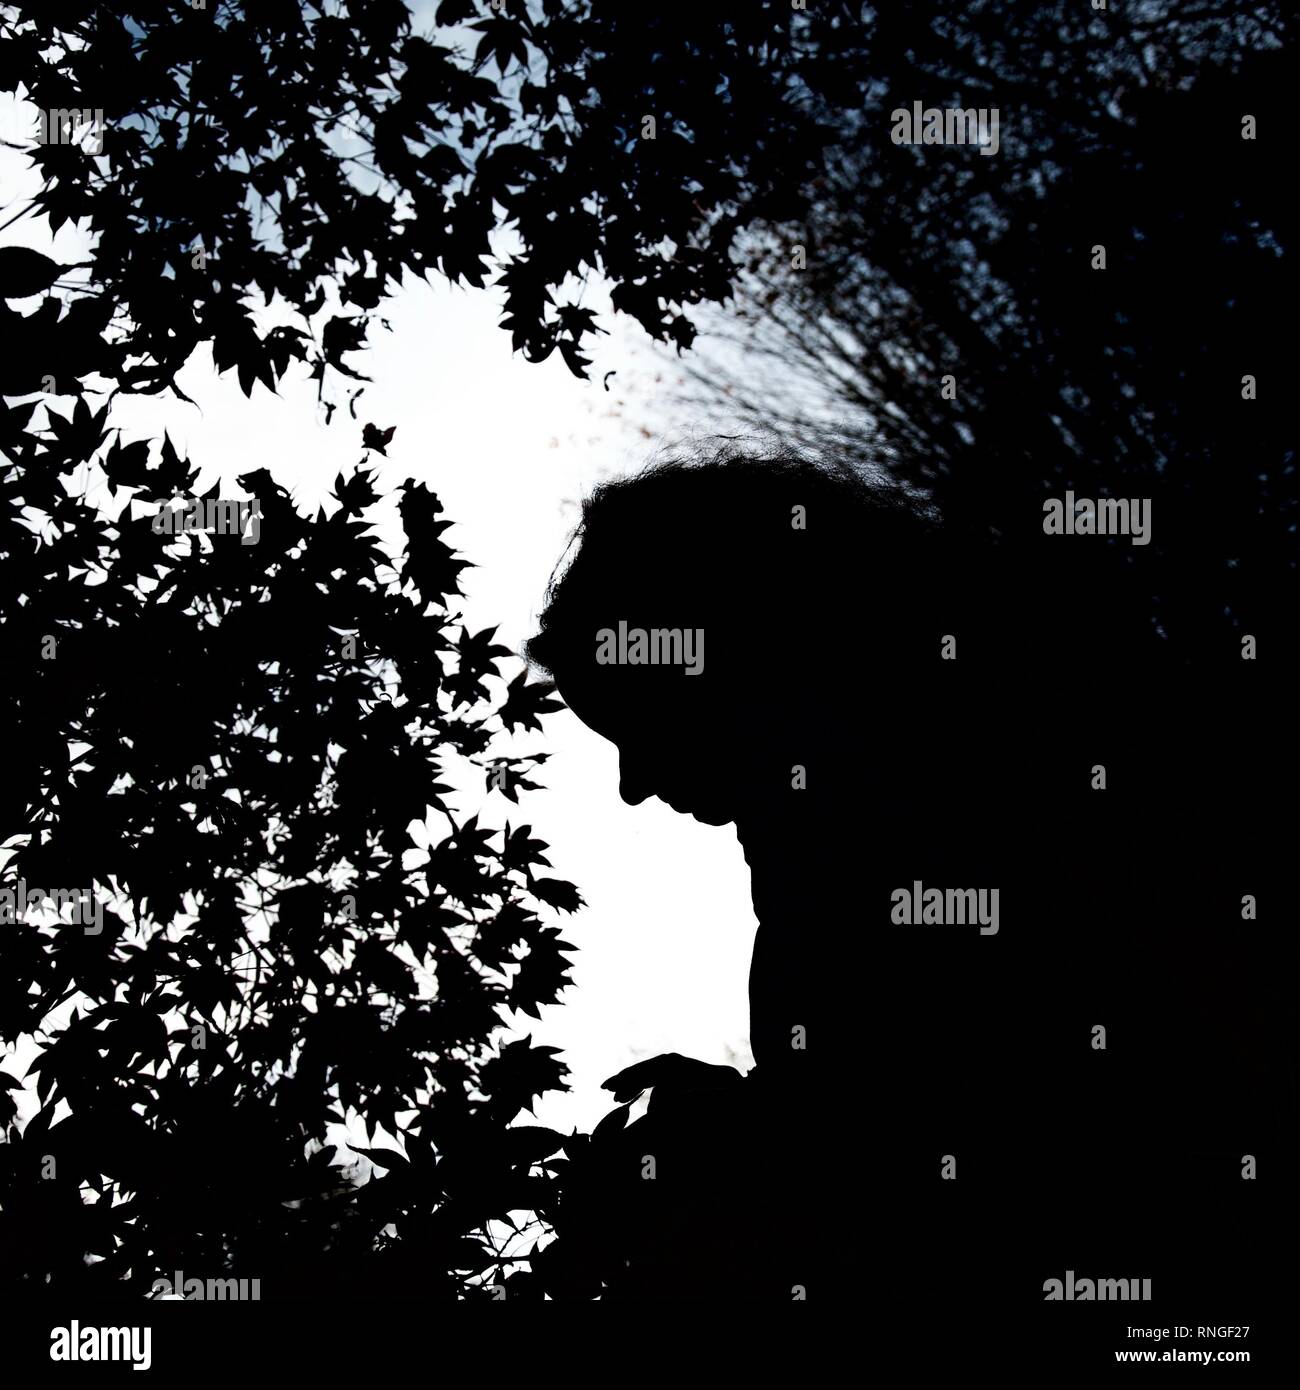 Silhouette of a long haired female profile surrounded by clearly distinguished maple leaves on a tree against the sky Stock Photo